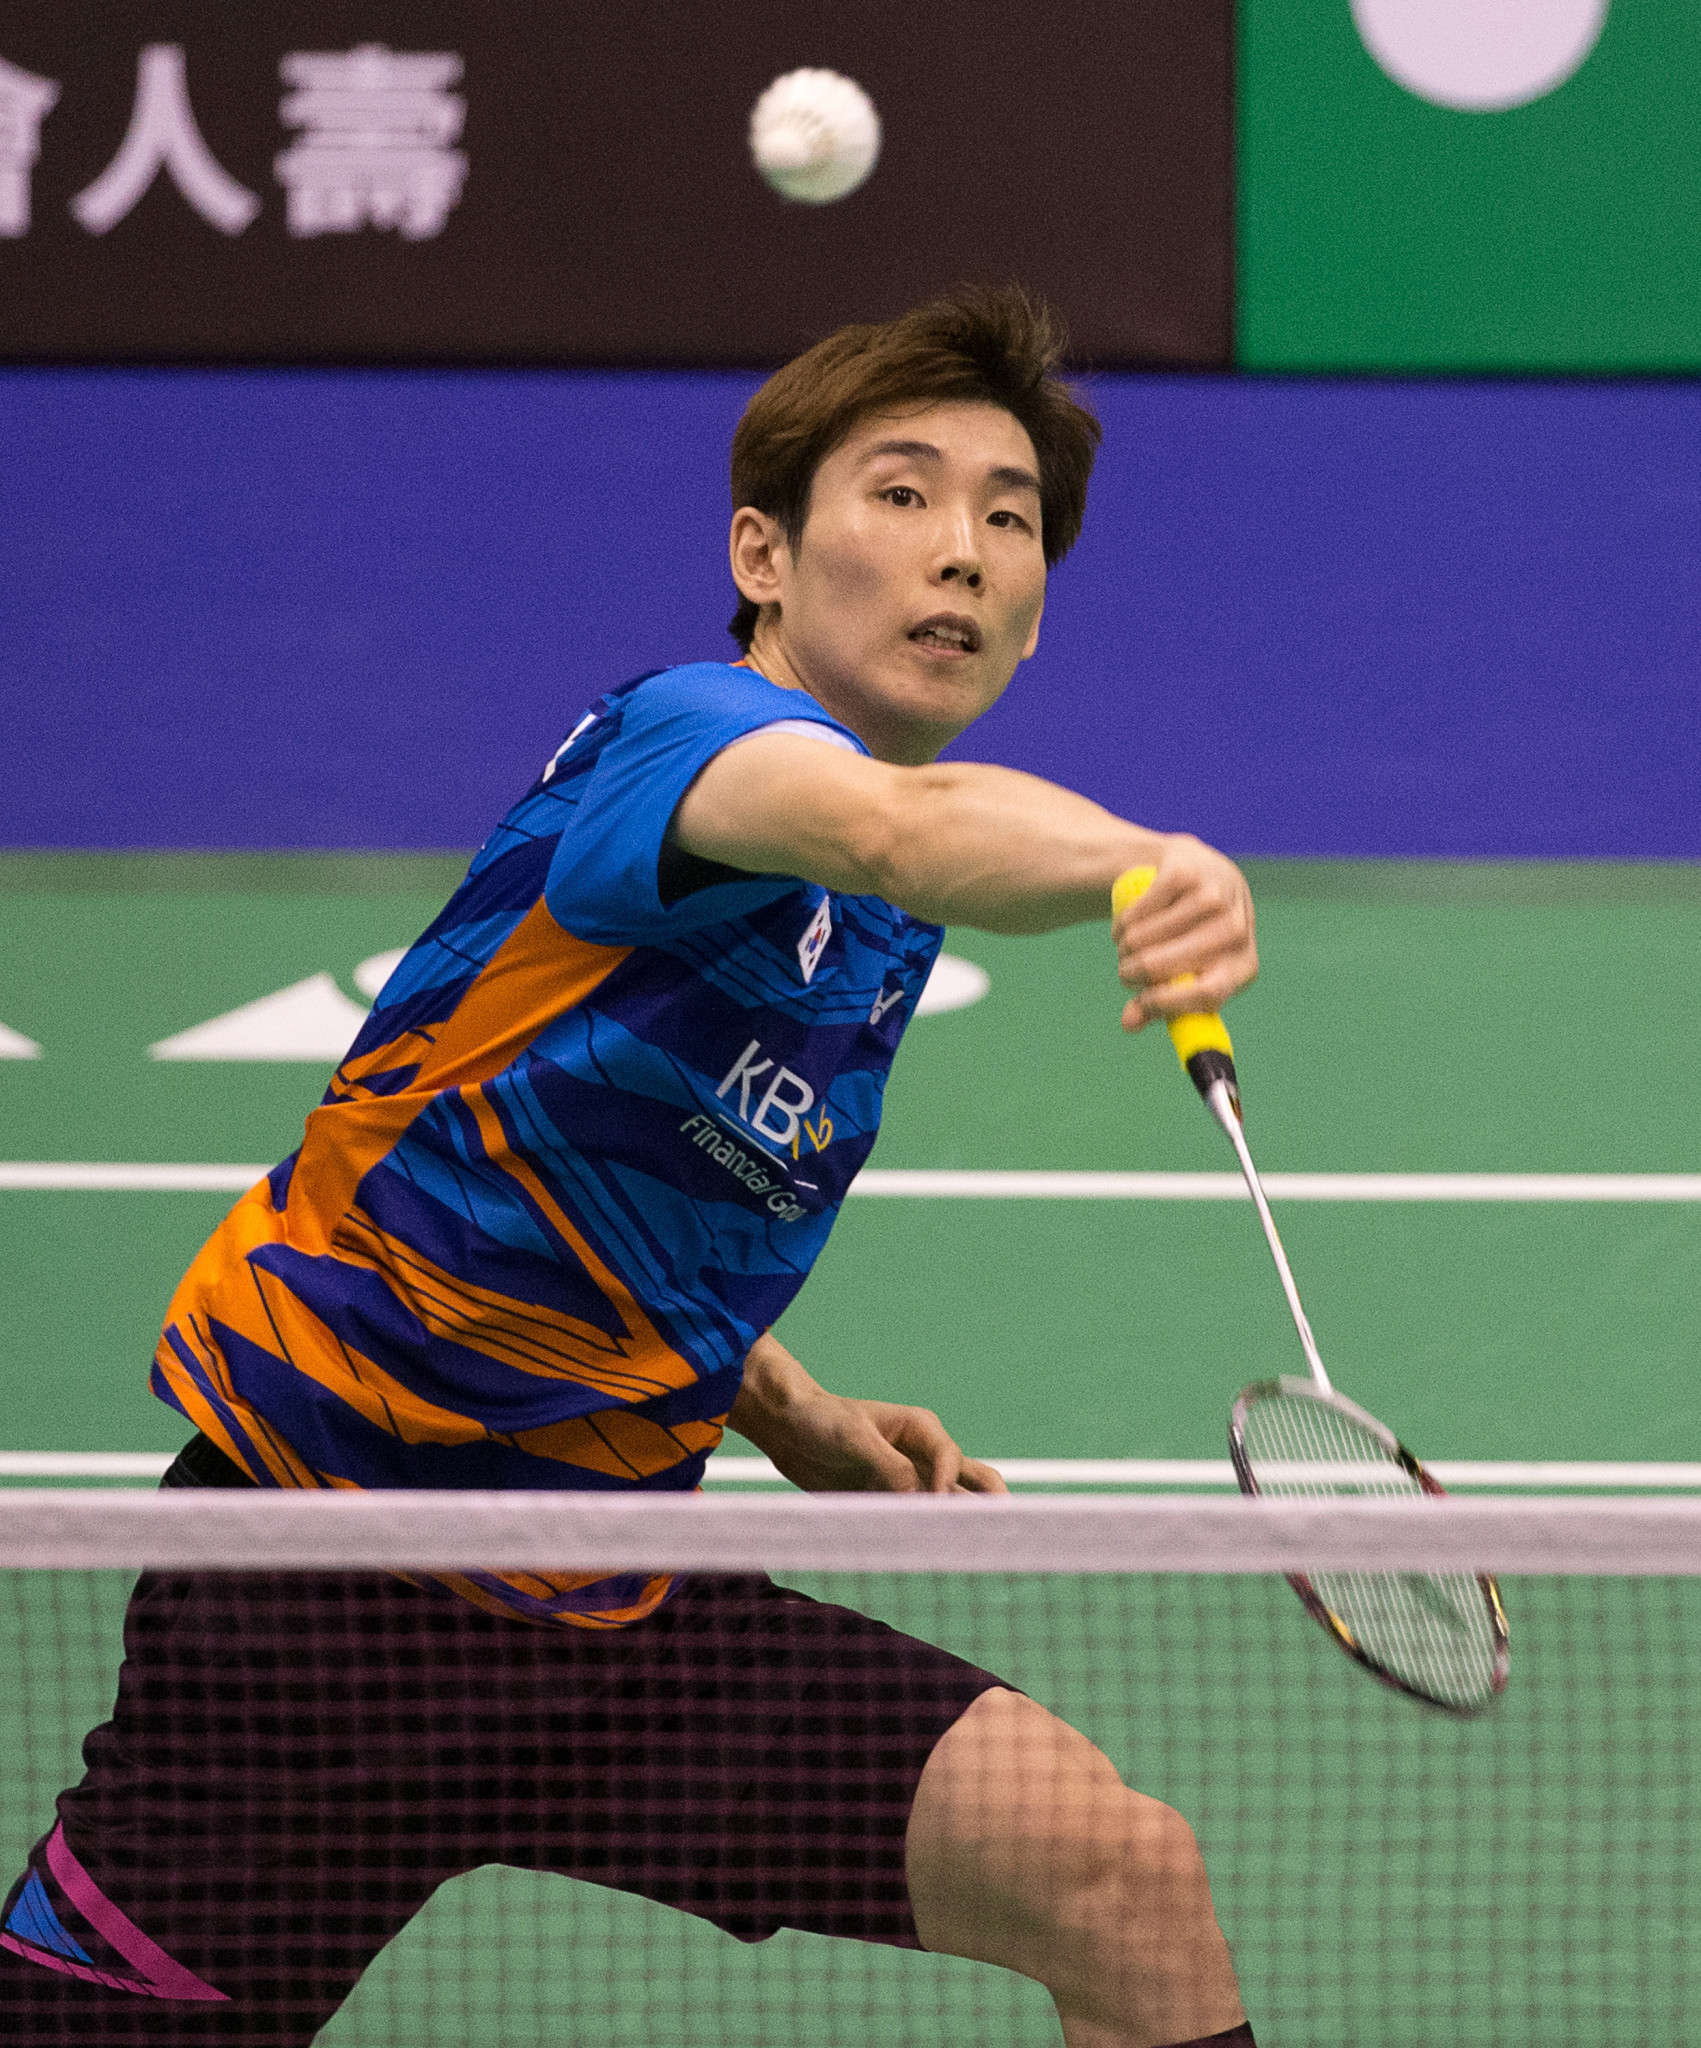 Son Wan-ho will be hoping for two successive victories against Lee Chong Wei when they meet in tomorrow's semi-final ©Getty Images